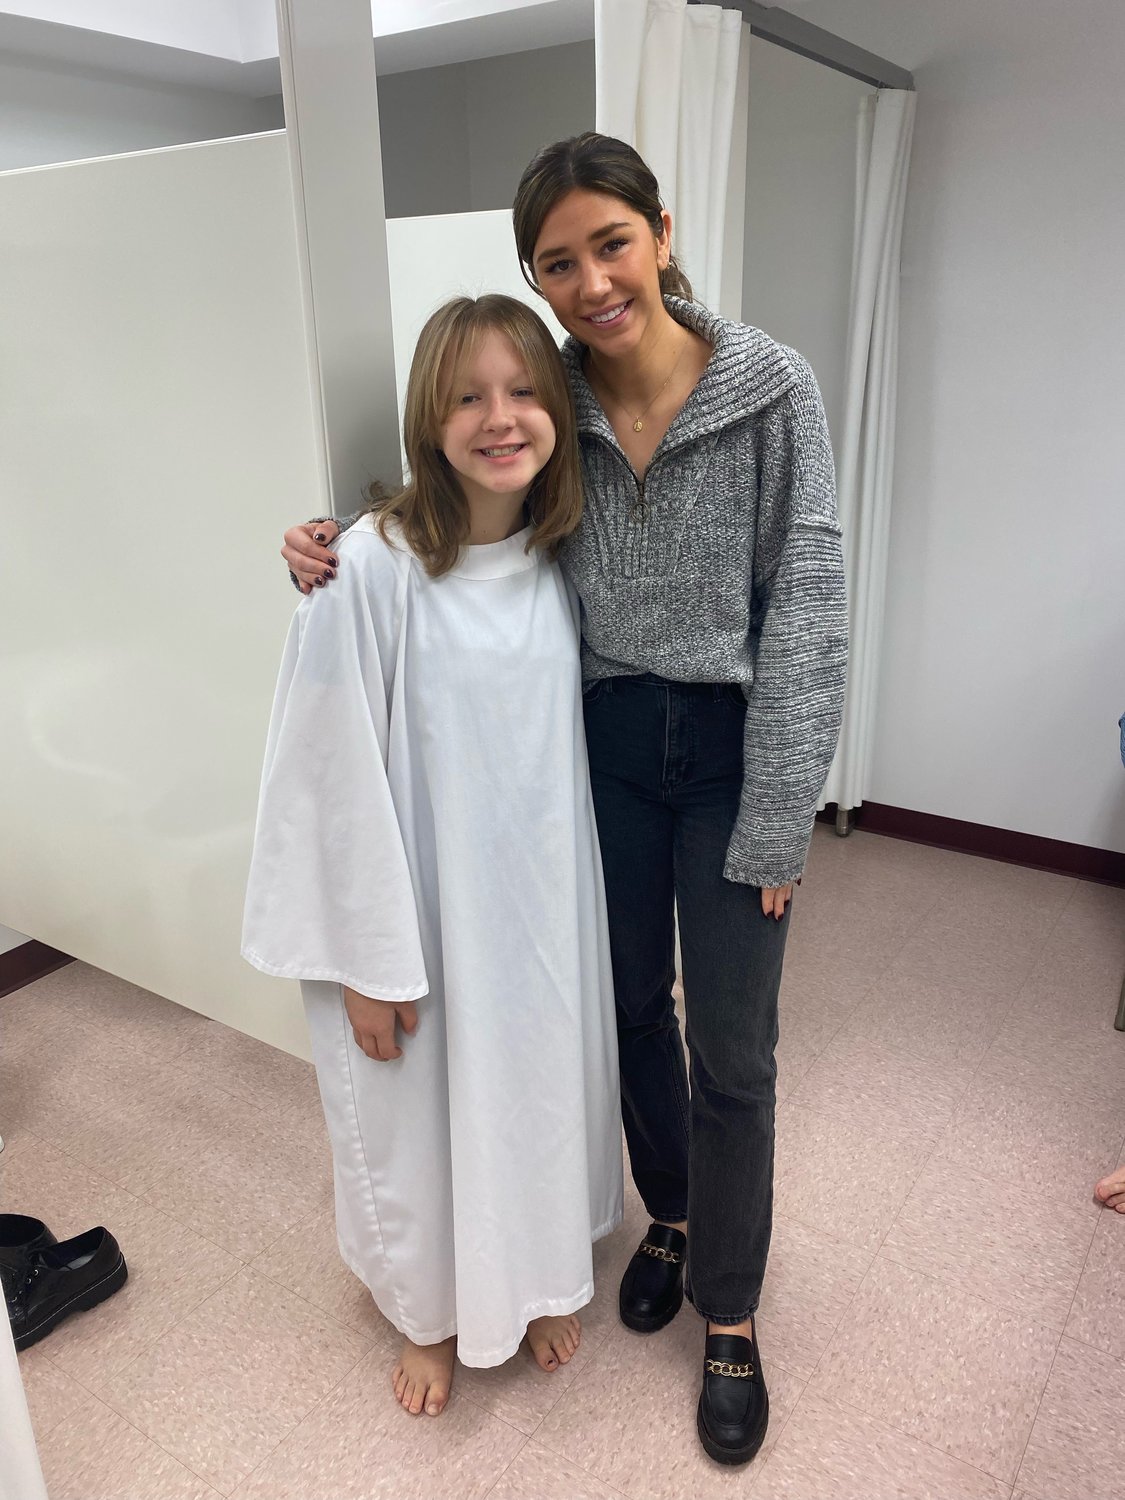 Lilly Chitwood, left, poses with her big sister, Anna. Lilly is the youngest and last of the Chitwood children to be baptized.